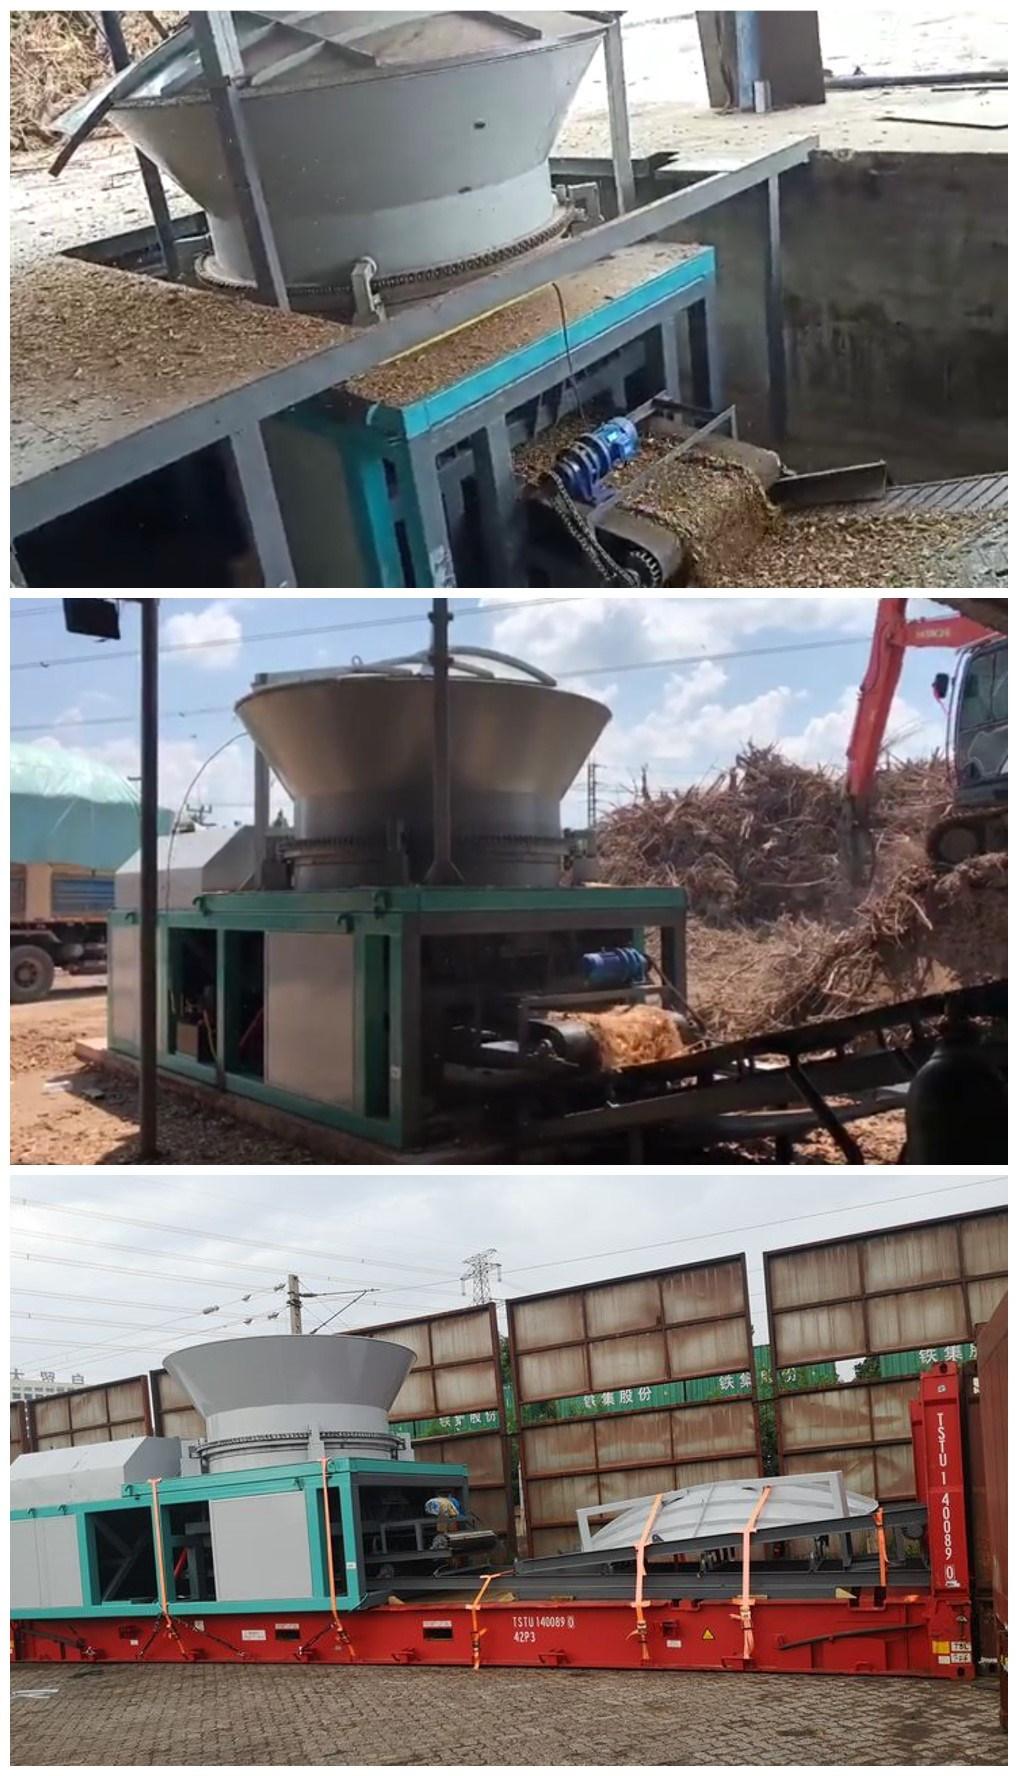 Waste Plastic Pipe Wood Pallet Metal Recycling Double Shaft Crusher